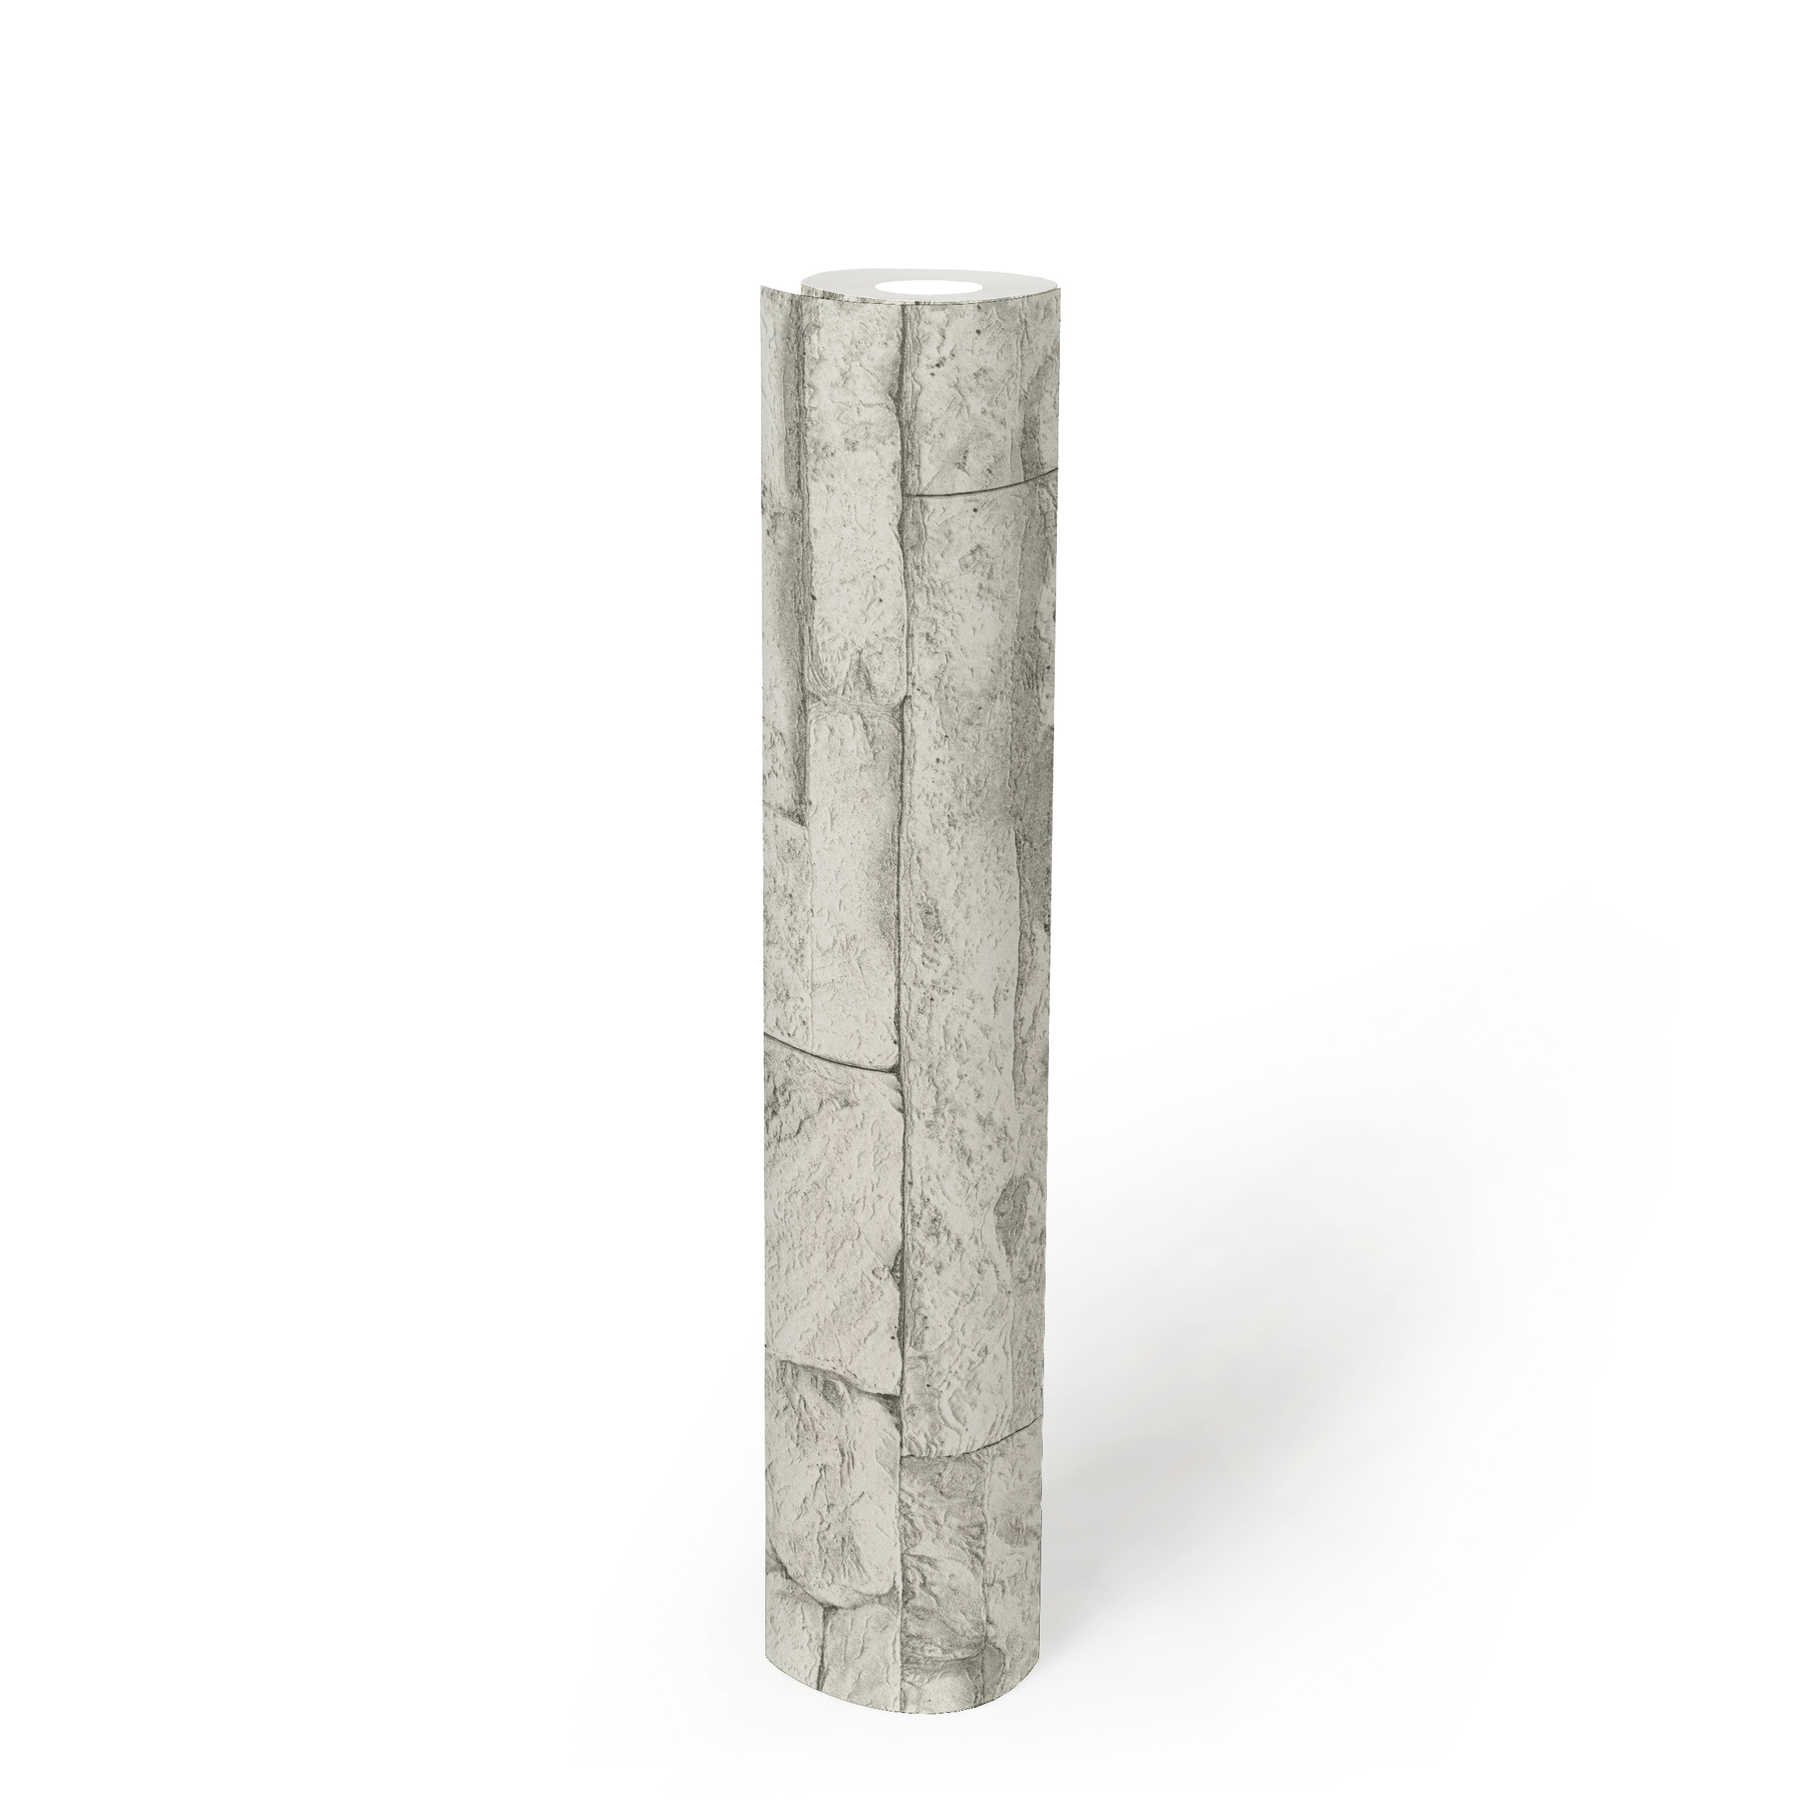             Wallpaper with light masonry from natural stones - white, grey
        